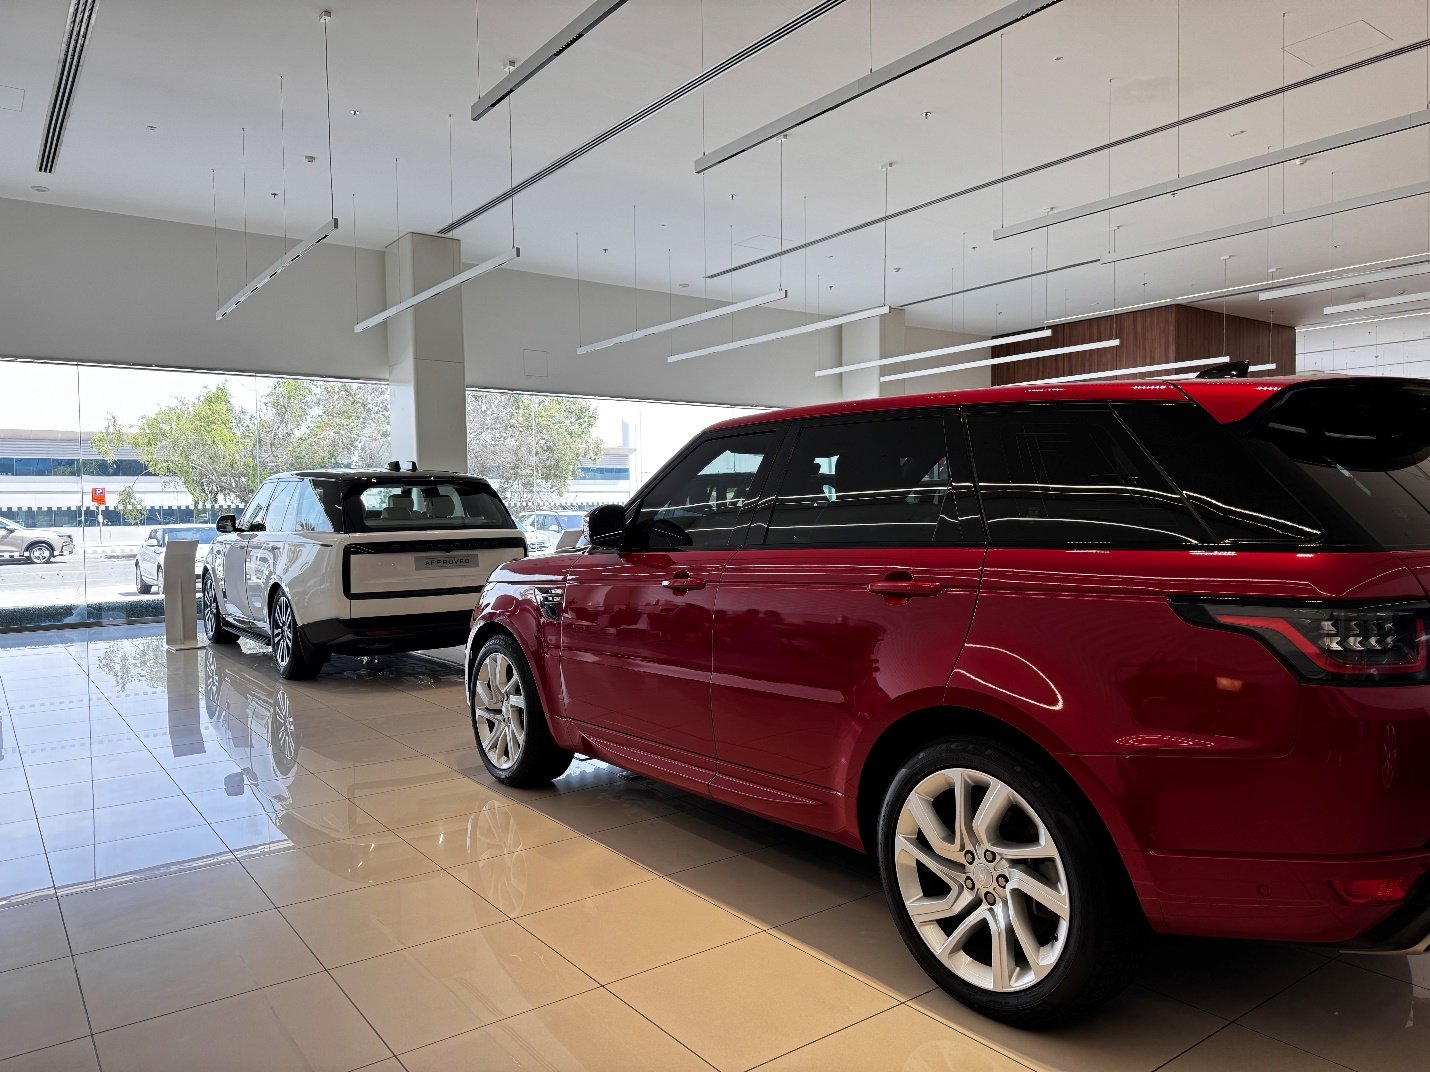 Car Insurance Dubai : A red car parked in a showroom